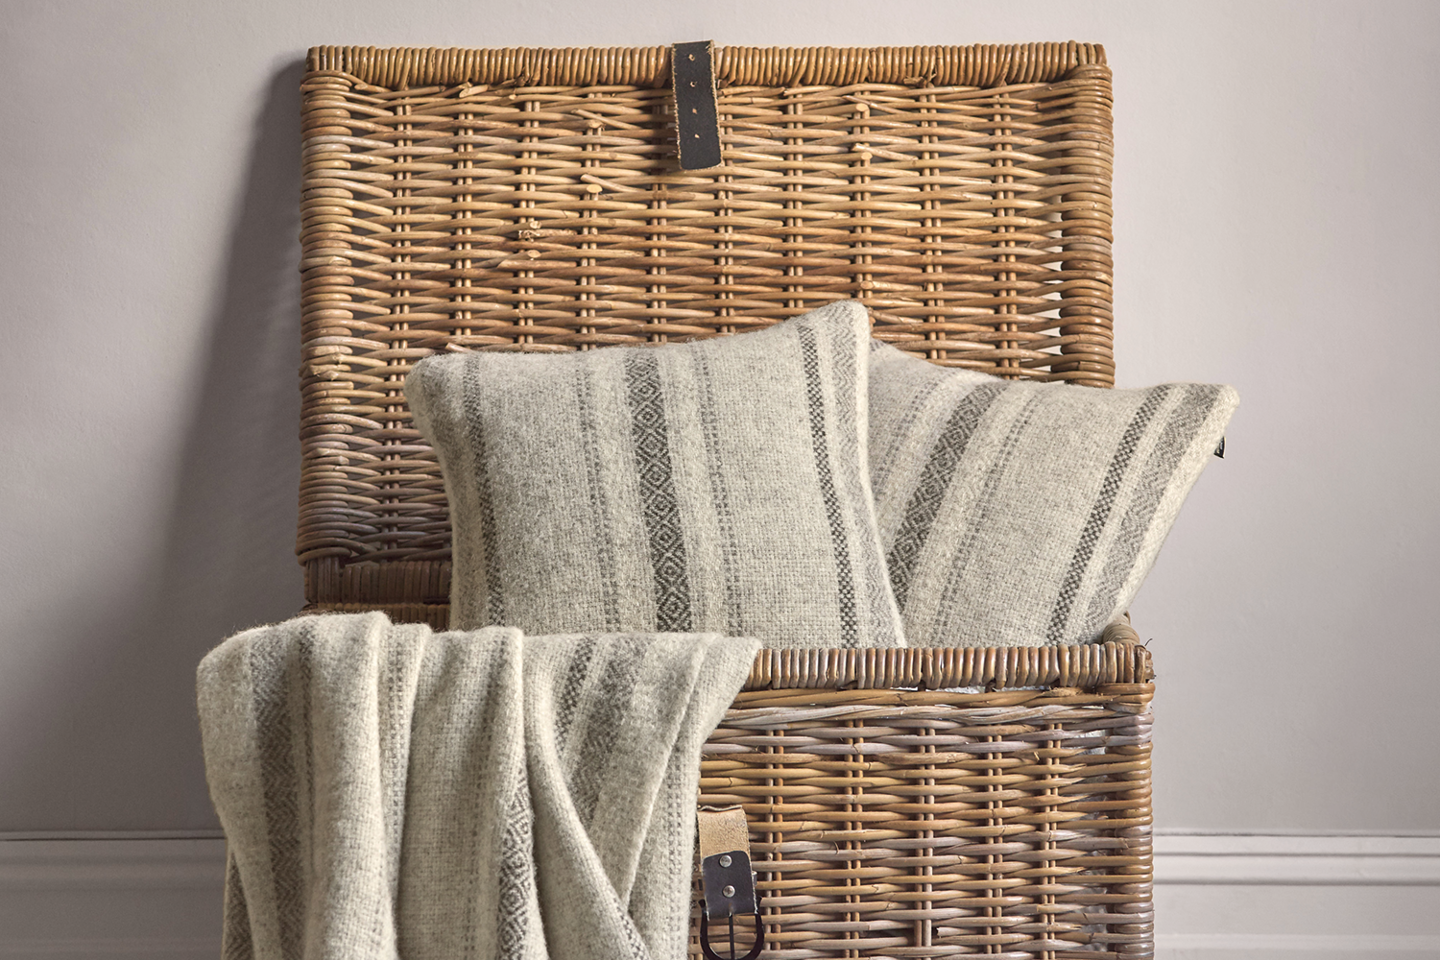 Floor basket with British Wool cushions and blankets spilling out from the british blanket company